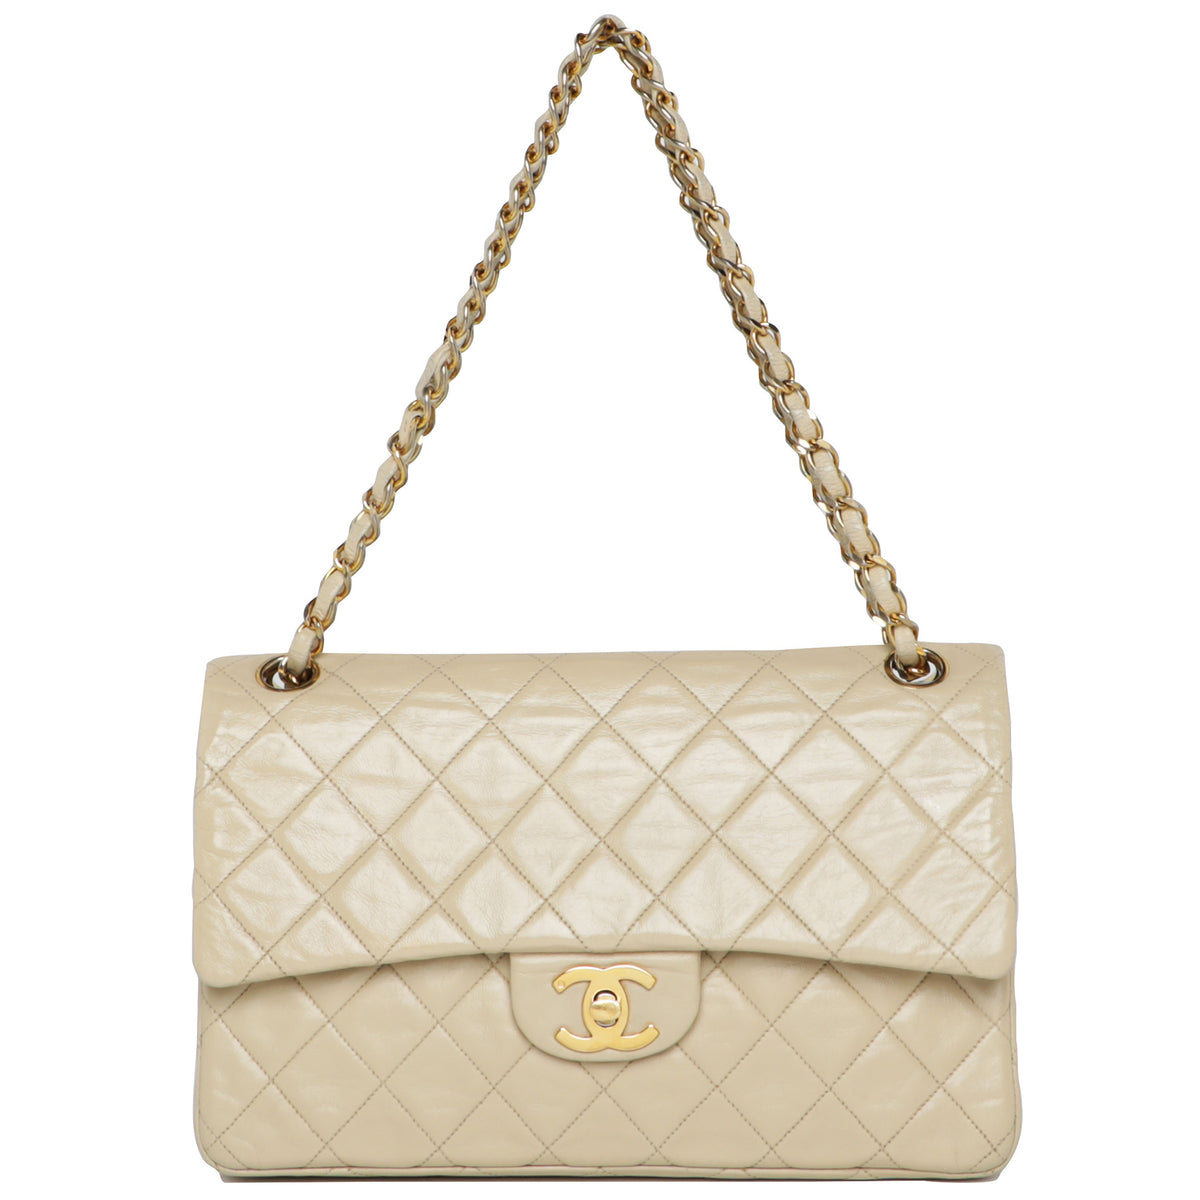 Chanel - White Lambskin Bag - cleaning needed?